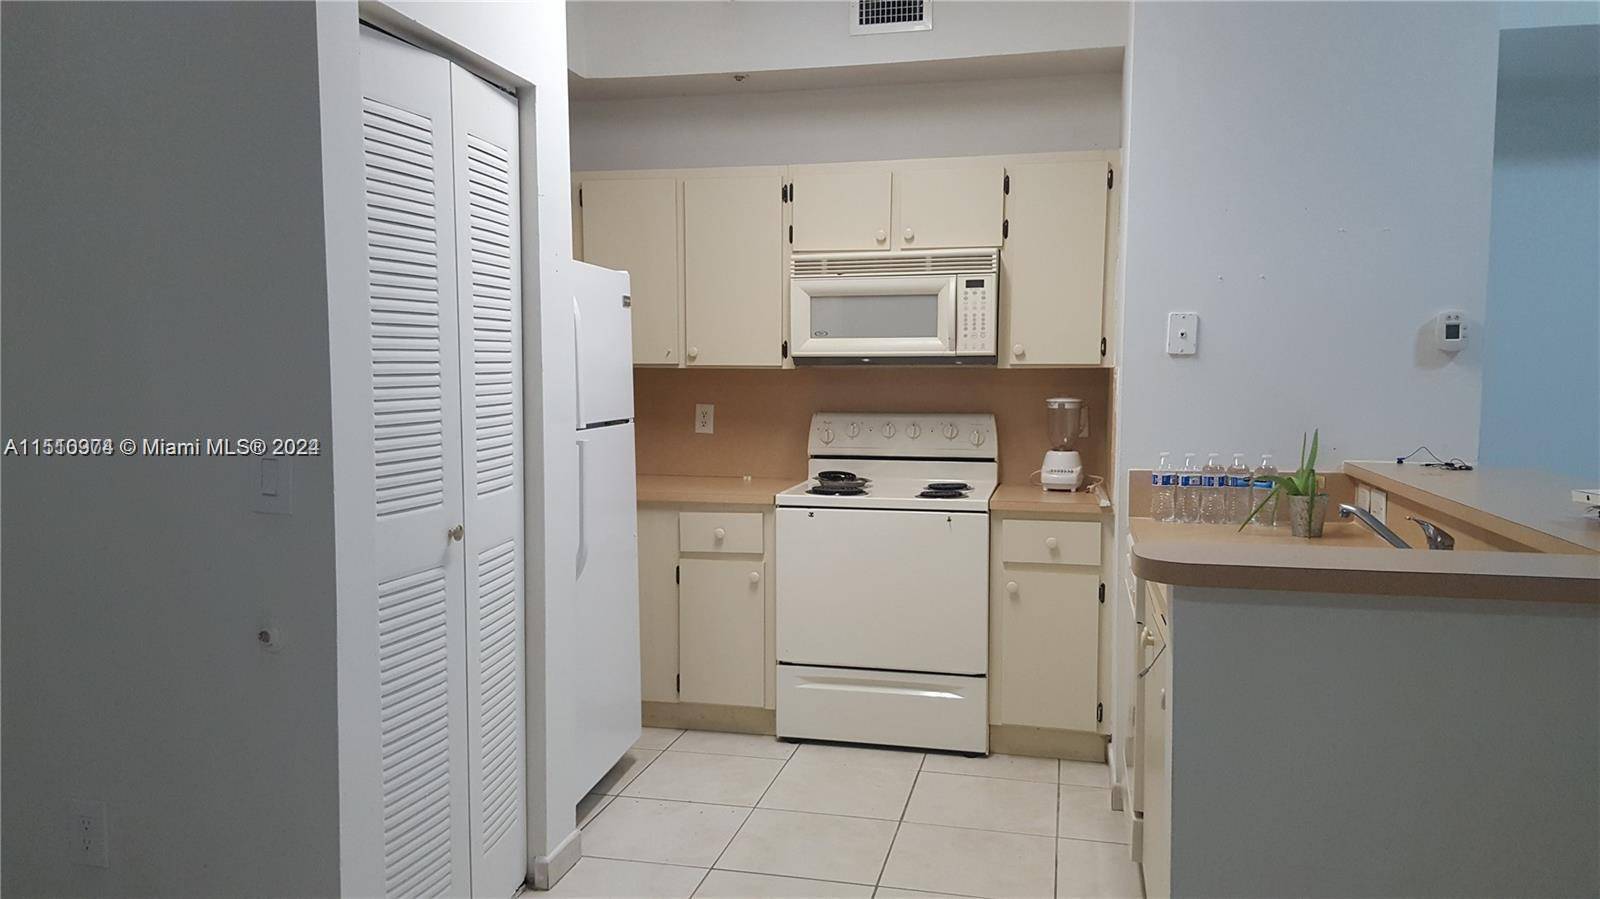 This unit is located in Palm Gardens at Doral, a gated community close to Turnpike, main highways and minutes away from Elementary, Middle and Senior High schools.